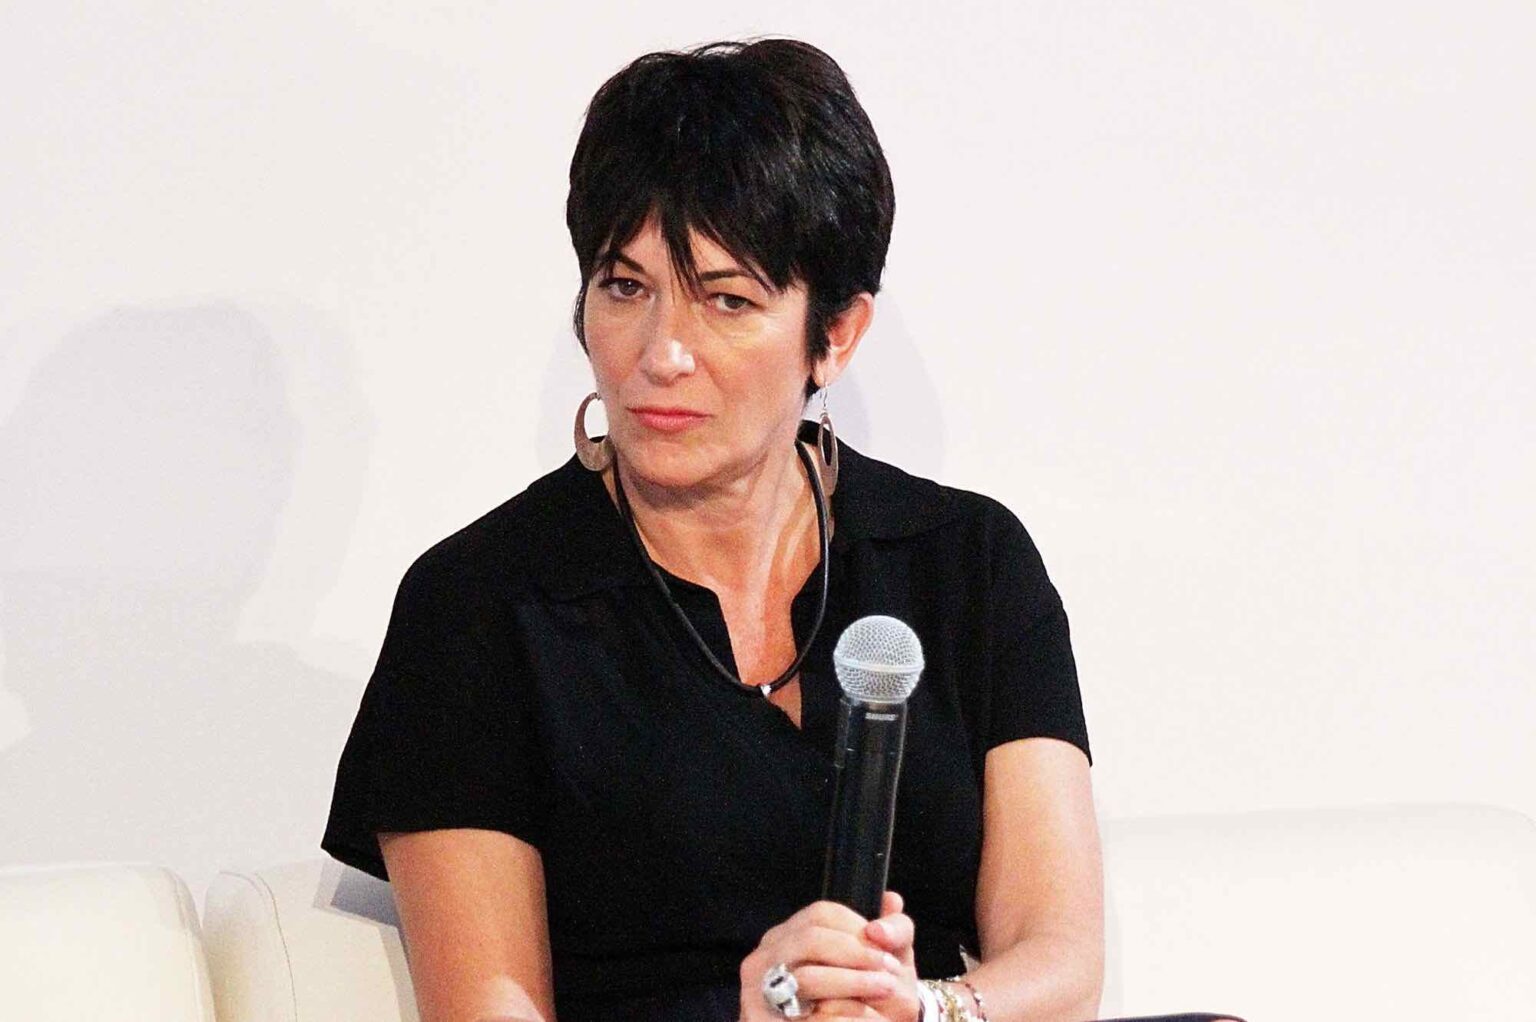 Ghislaine Maxwell is also being charged as a prime suspected involved in Epstein’s sex offences. Here are all the details about the investigation.